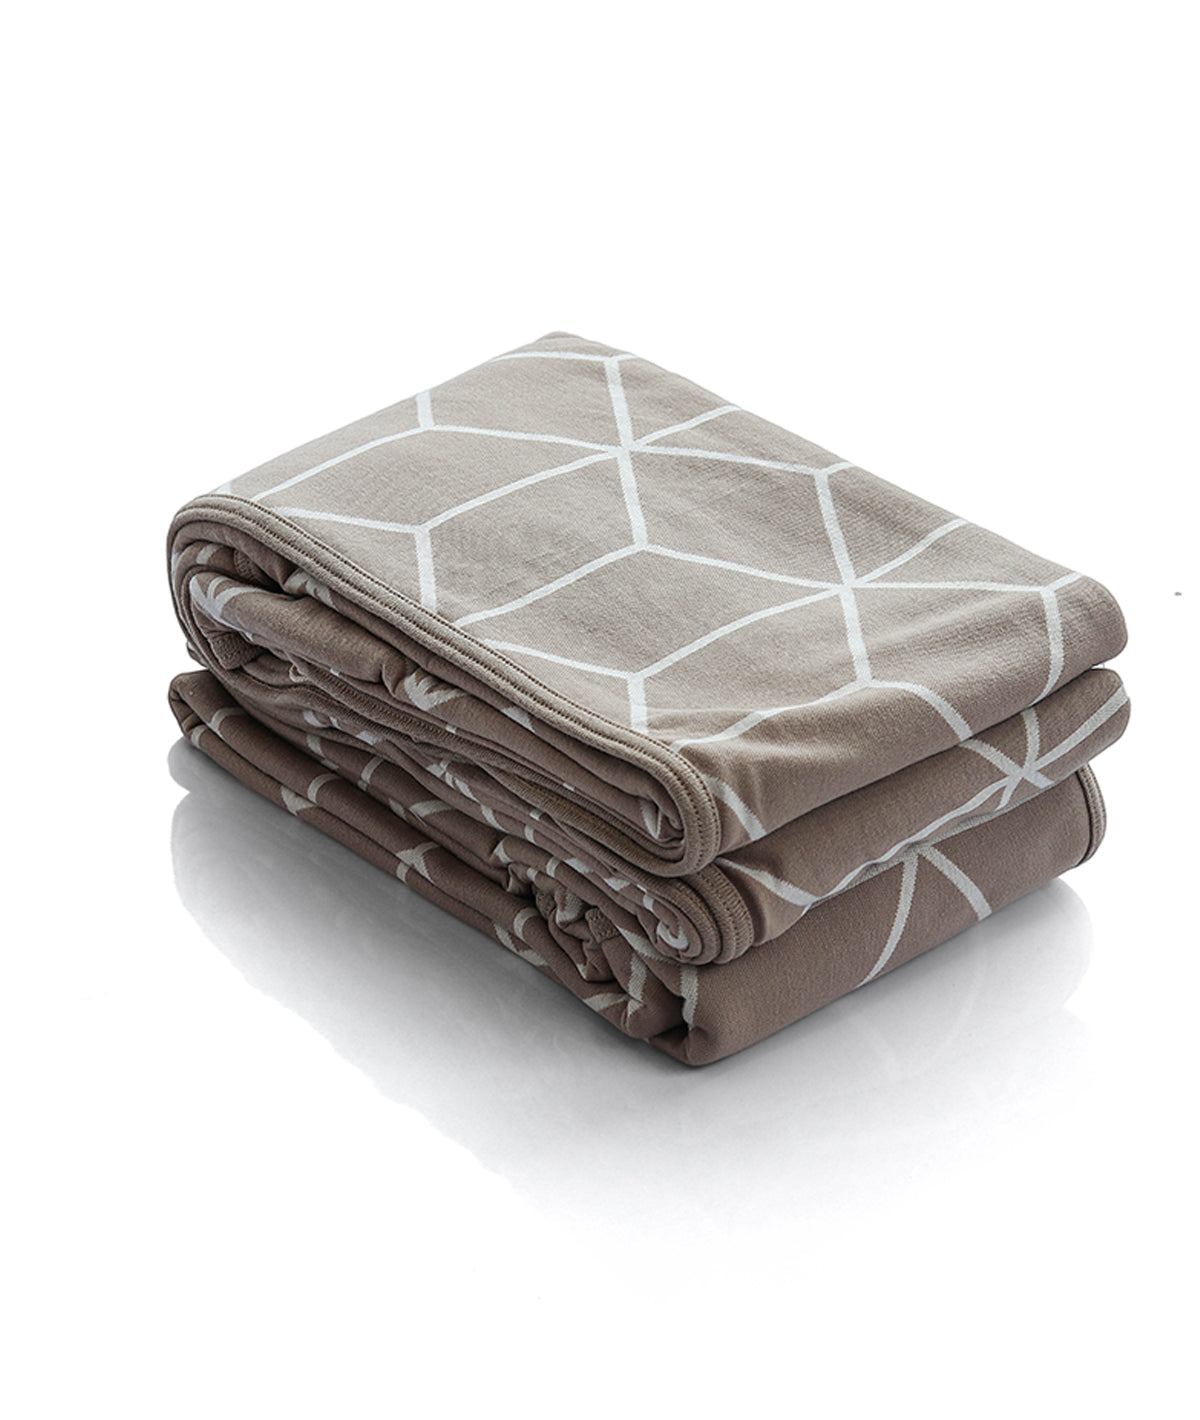 3D Cubic Cotton Knitted Double Bed AC Blanket / Dohar For Round The Year Use (Stone & Natural)